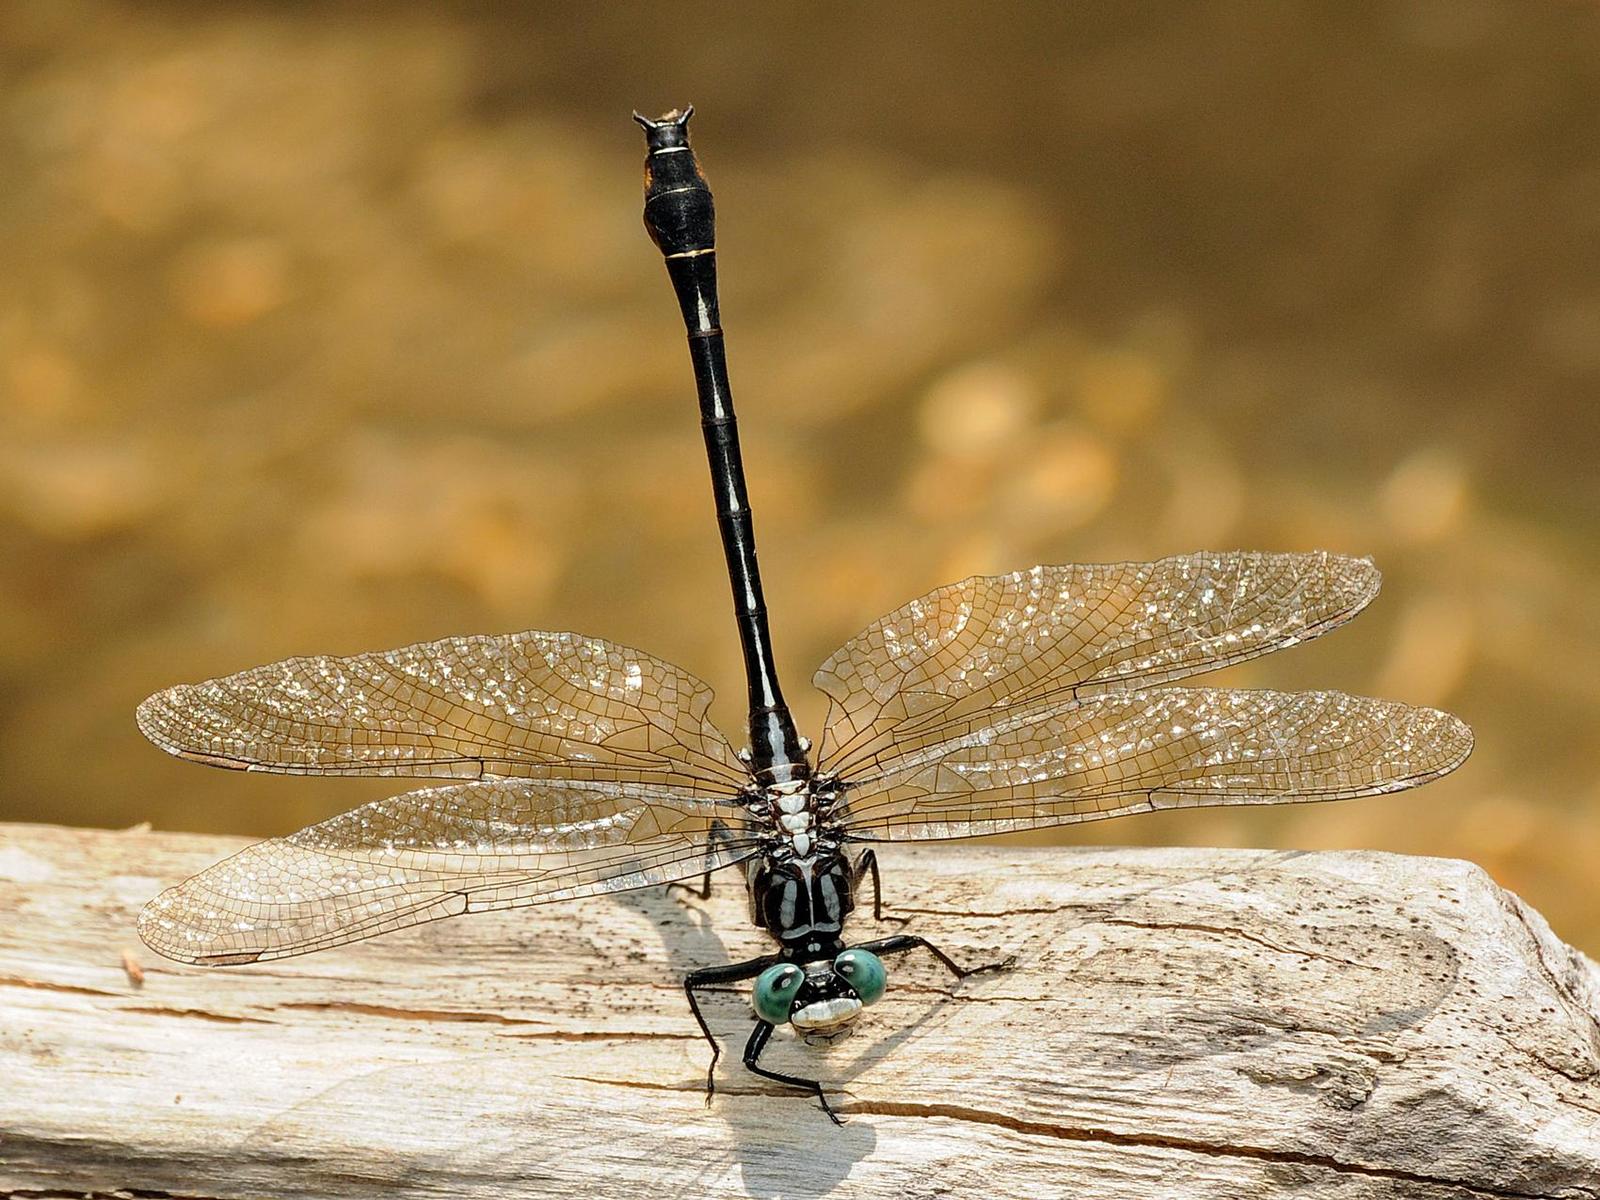 Cherokee Clubtail Photo by marion dobbs